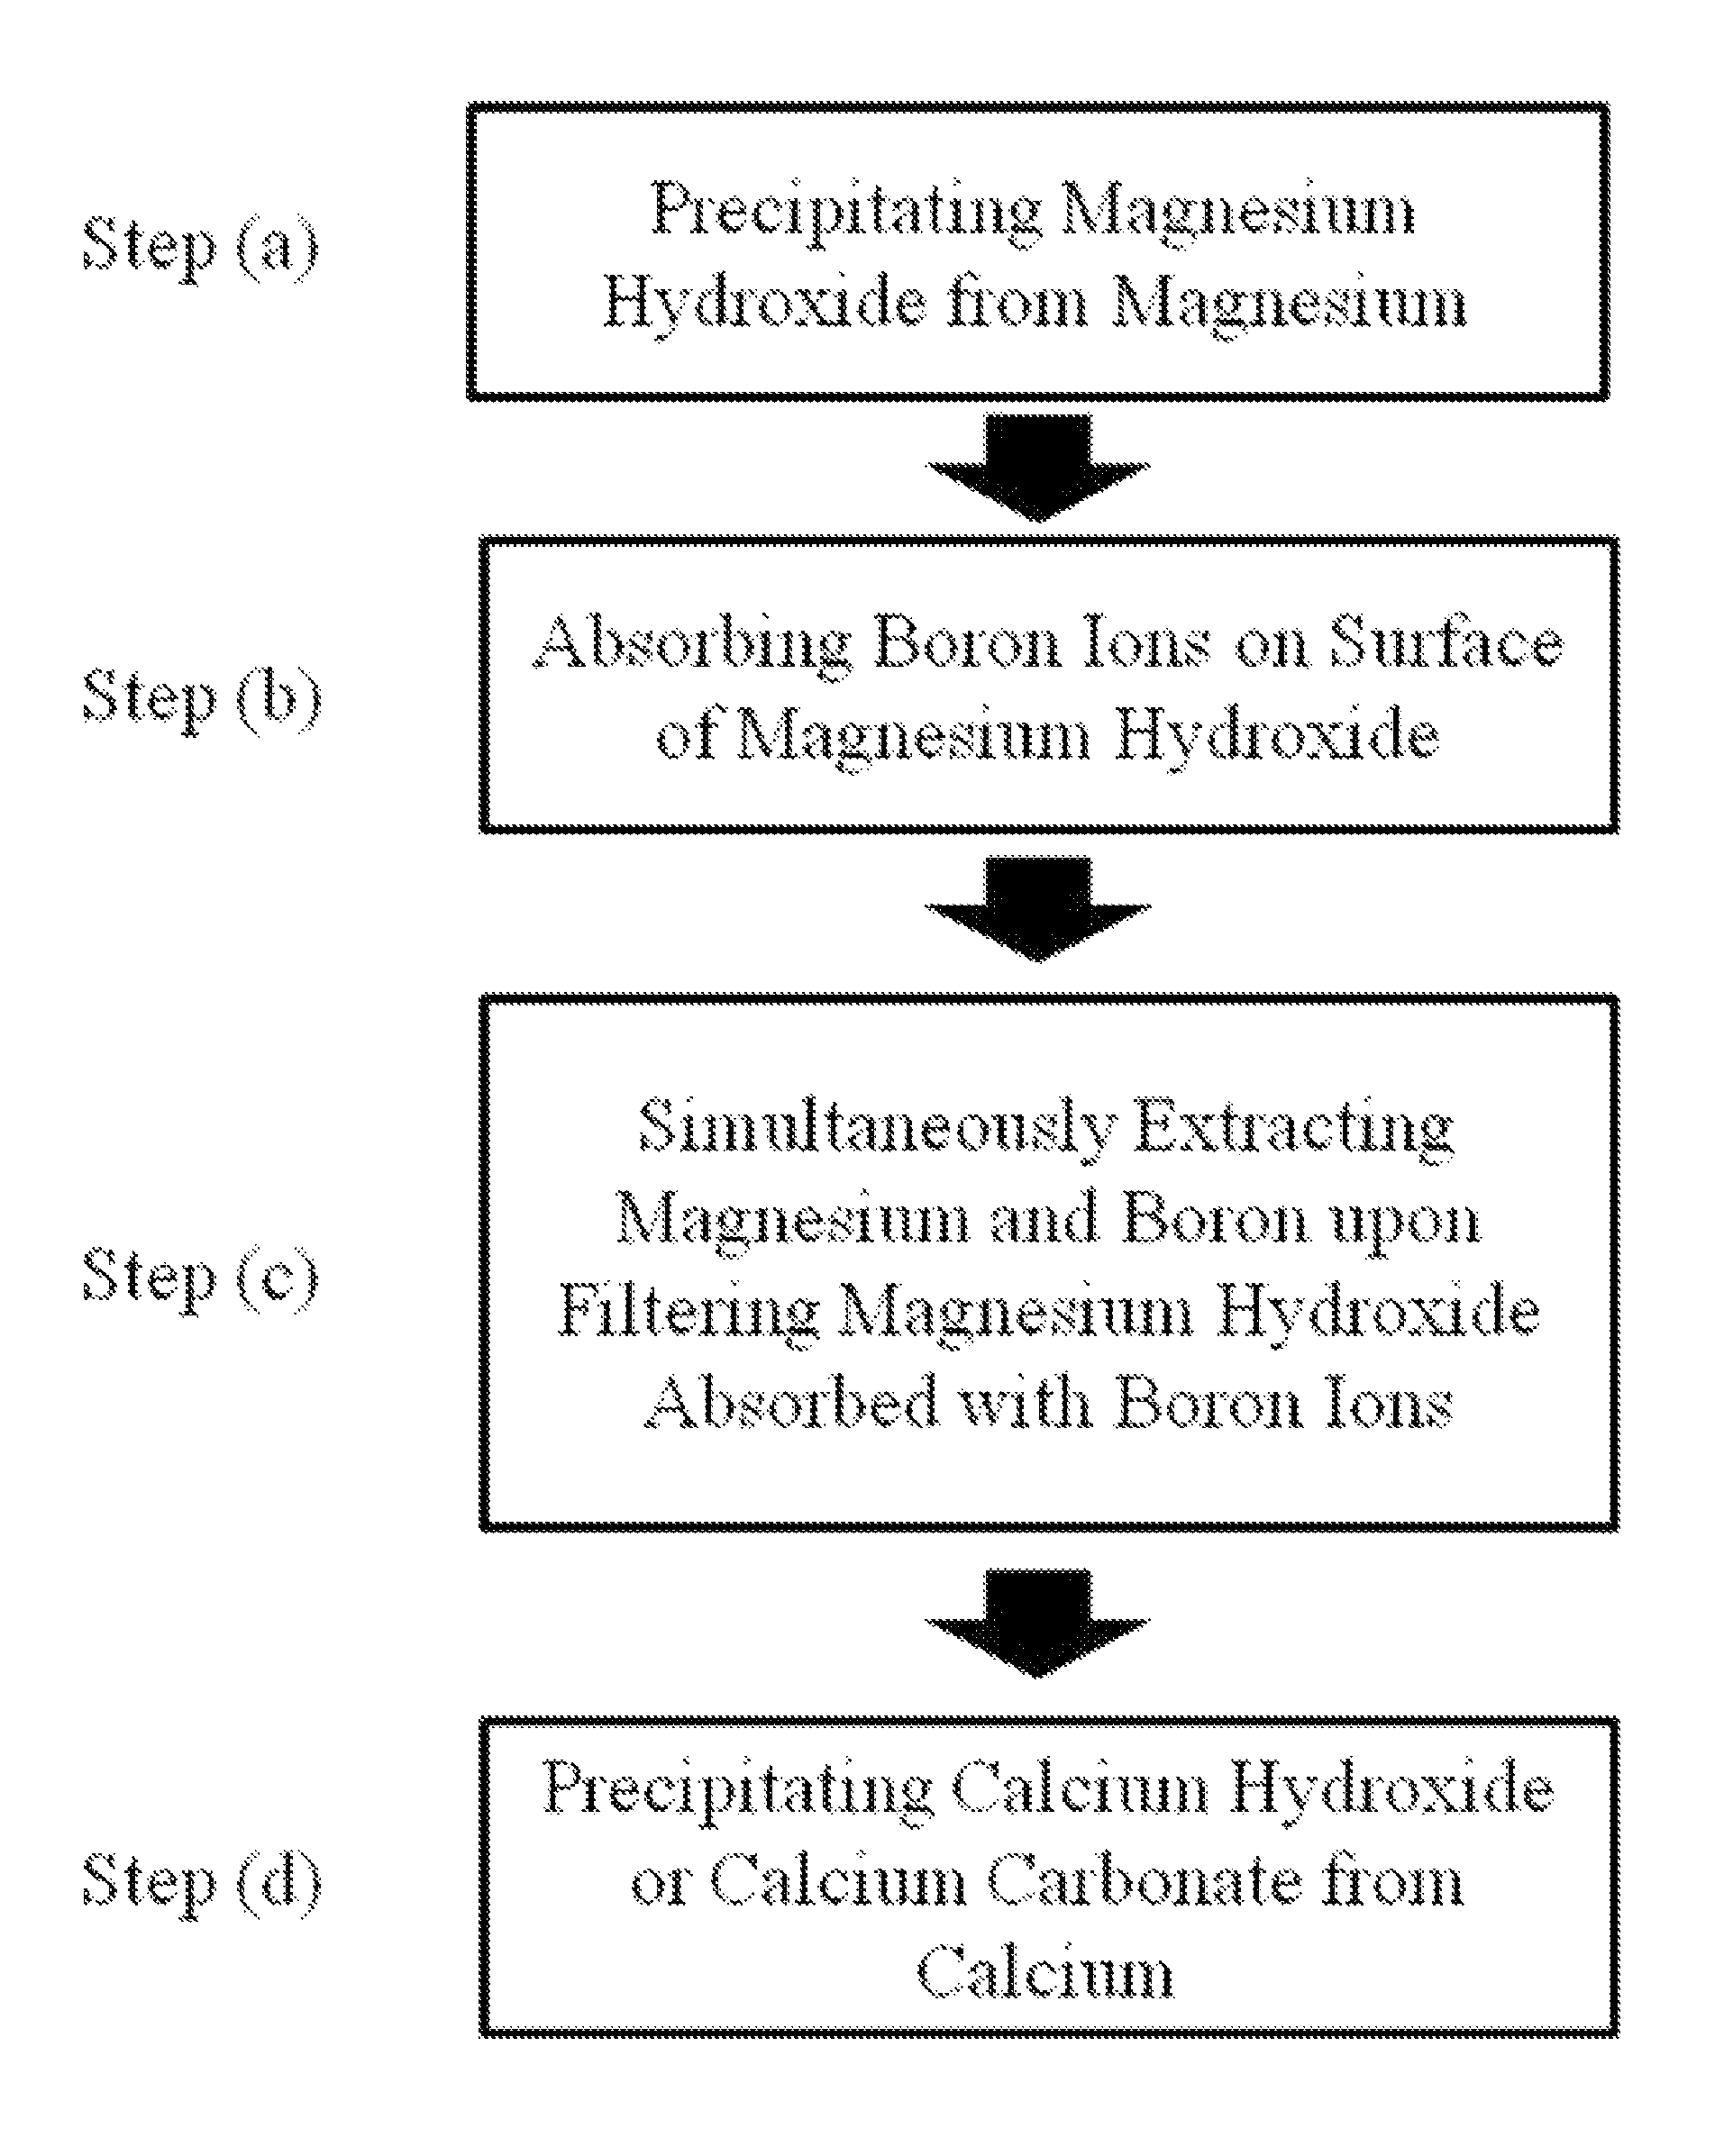 Method for economical extraction of magnesium, boron and calcium from lithium bearing solution